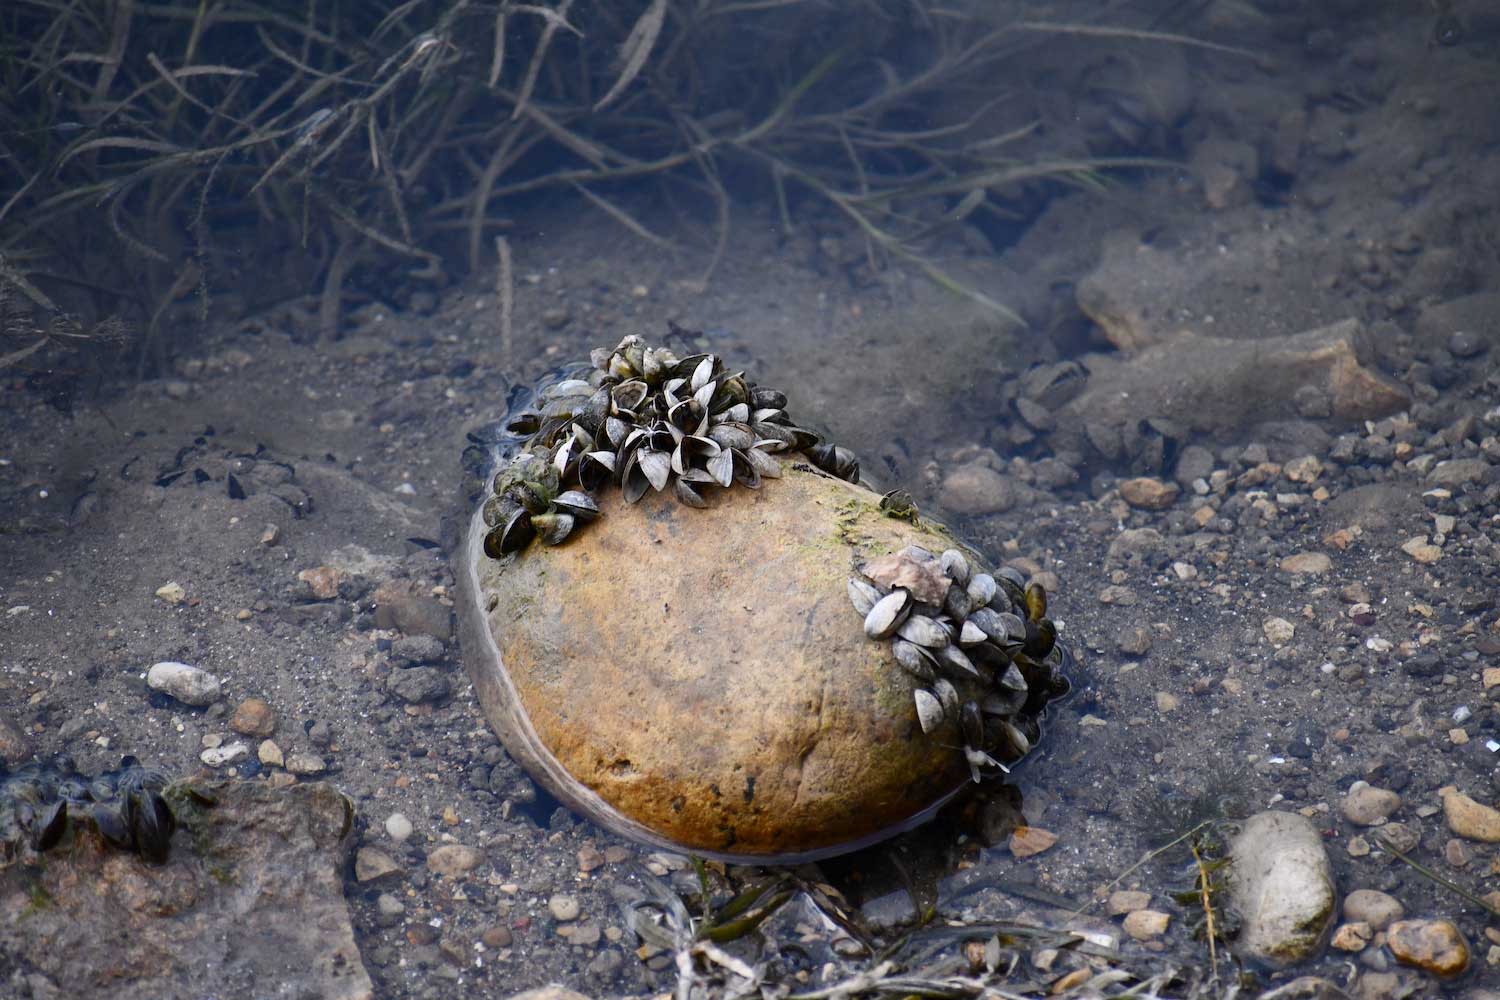 Two clusters of zebra mussels on a rock in the water.